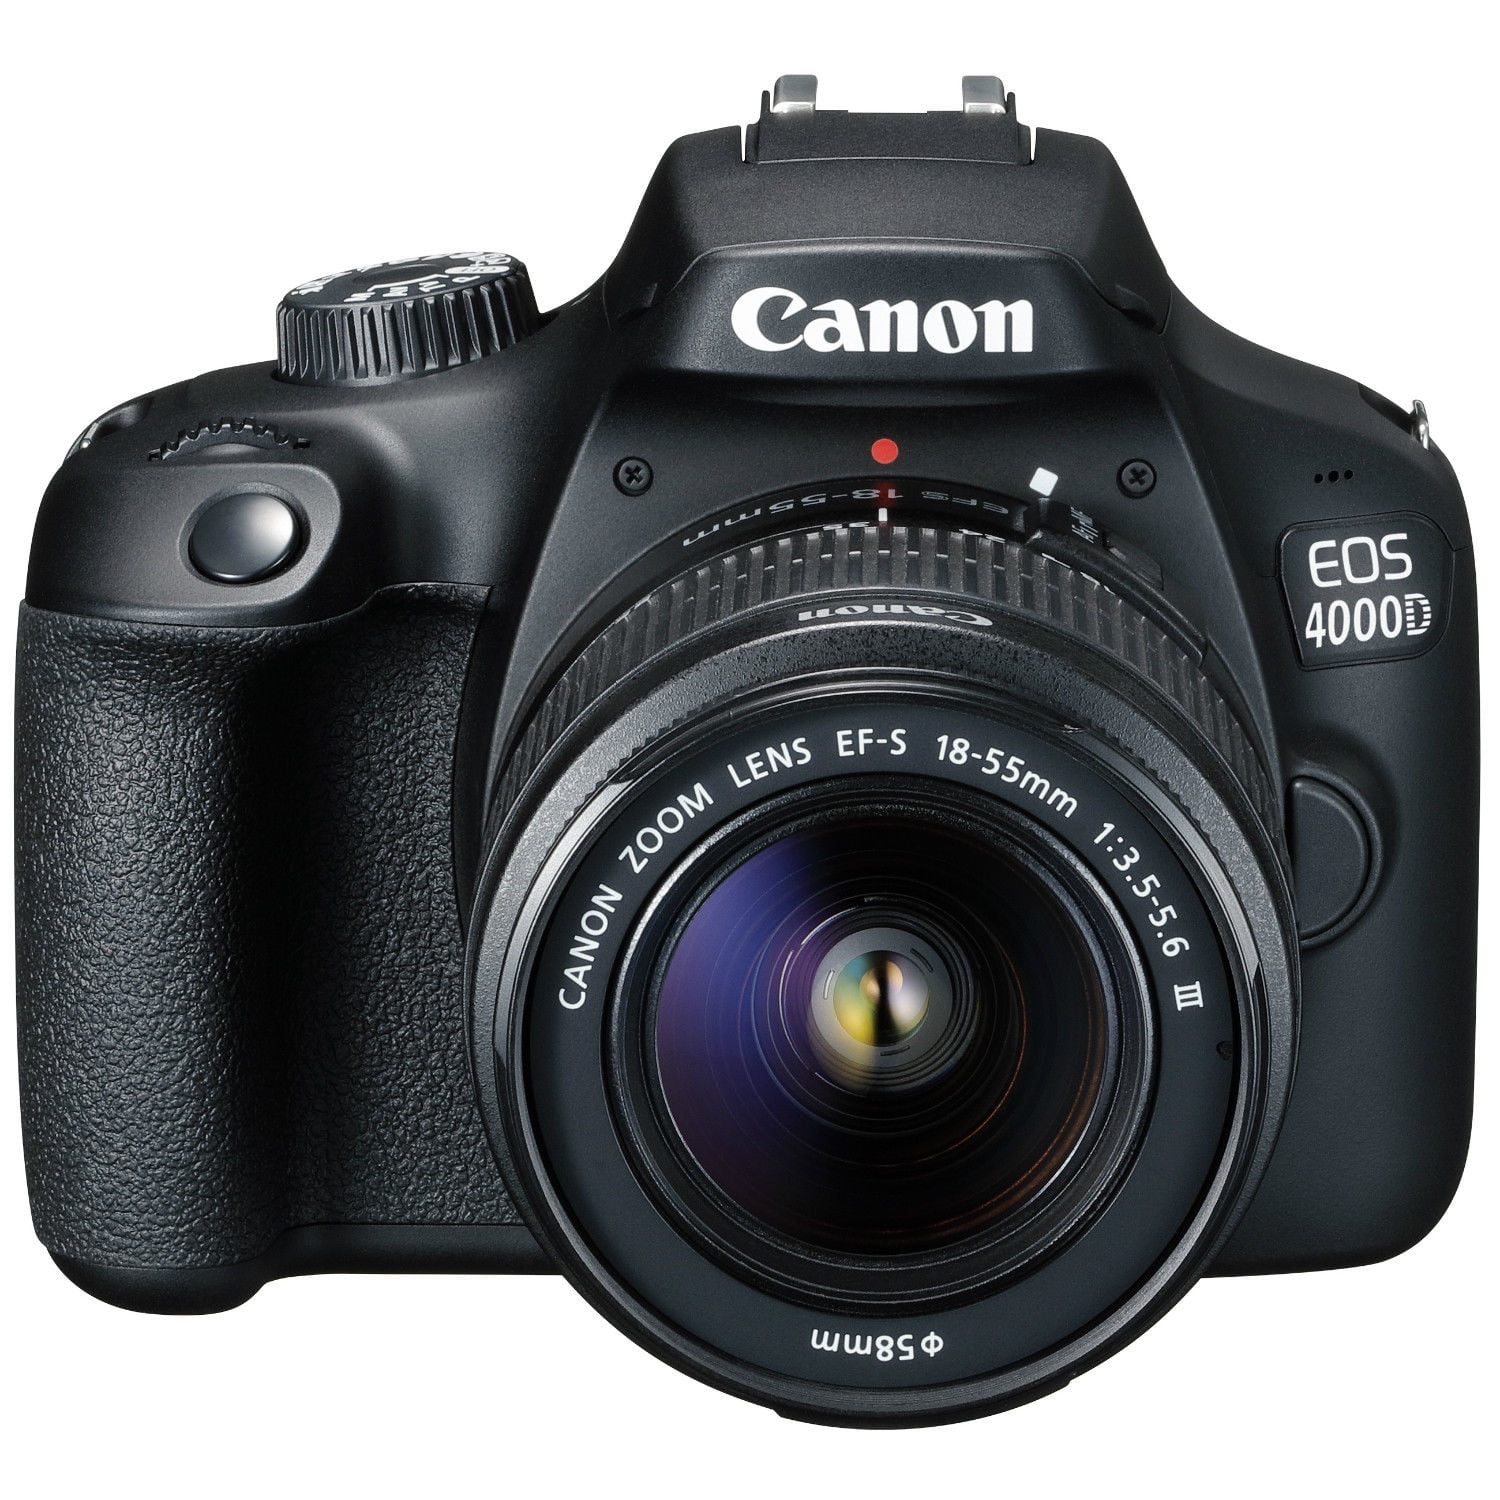 canon-eos-4000d-with-ef-s-18-55mm-iii-lens-digital-slr-cameras-from-usa